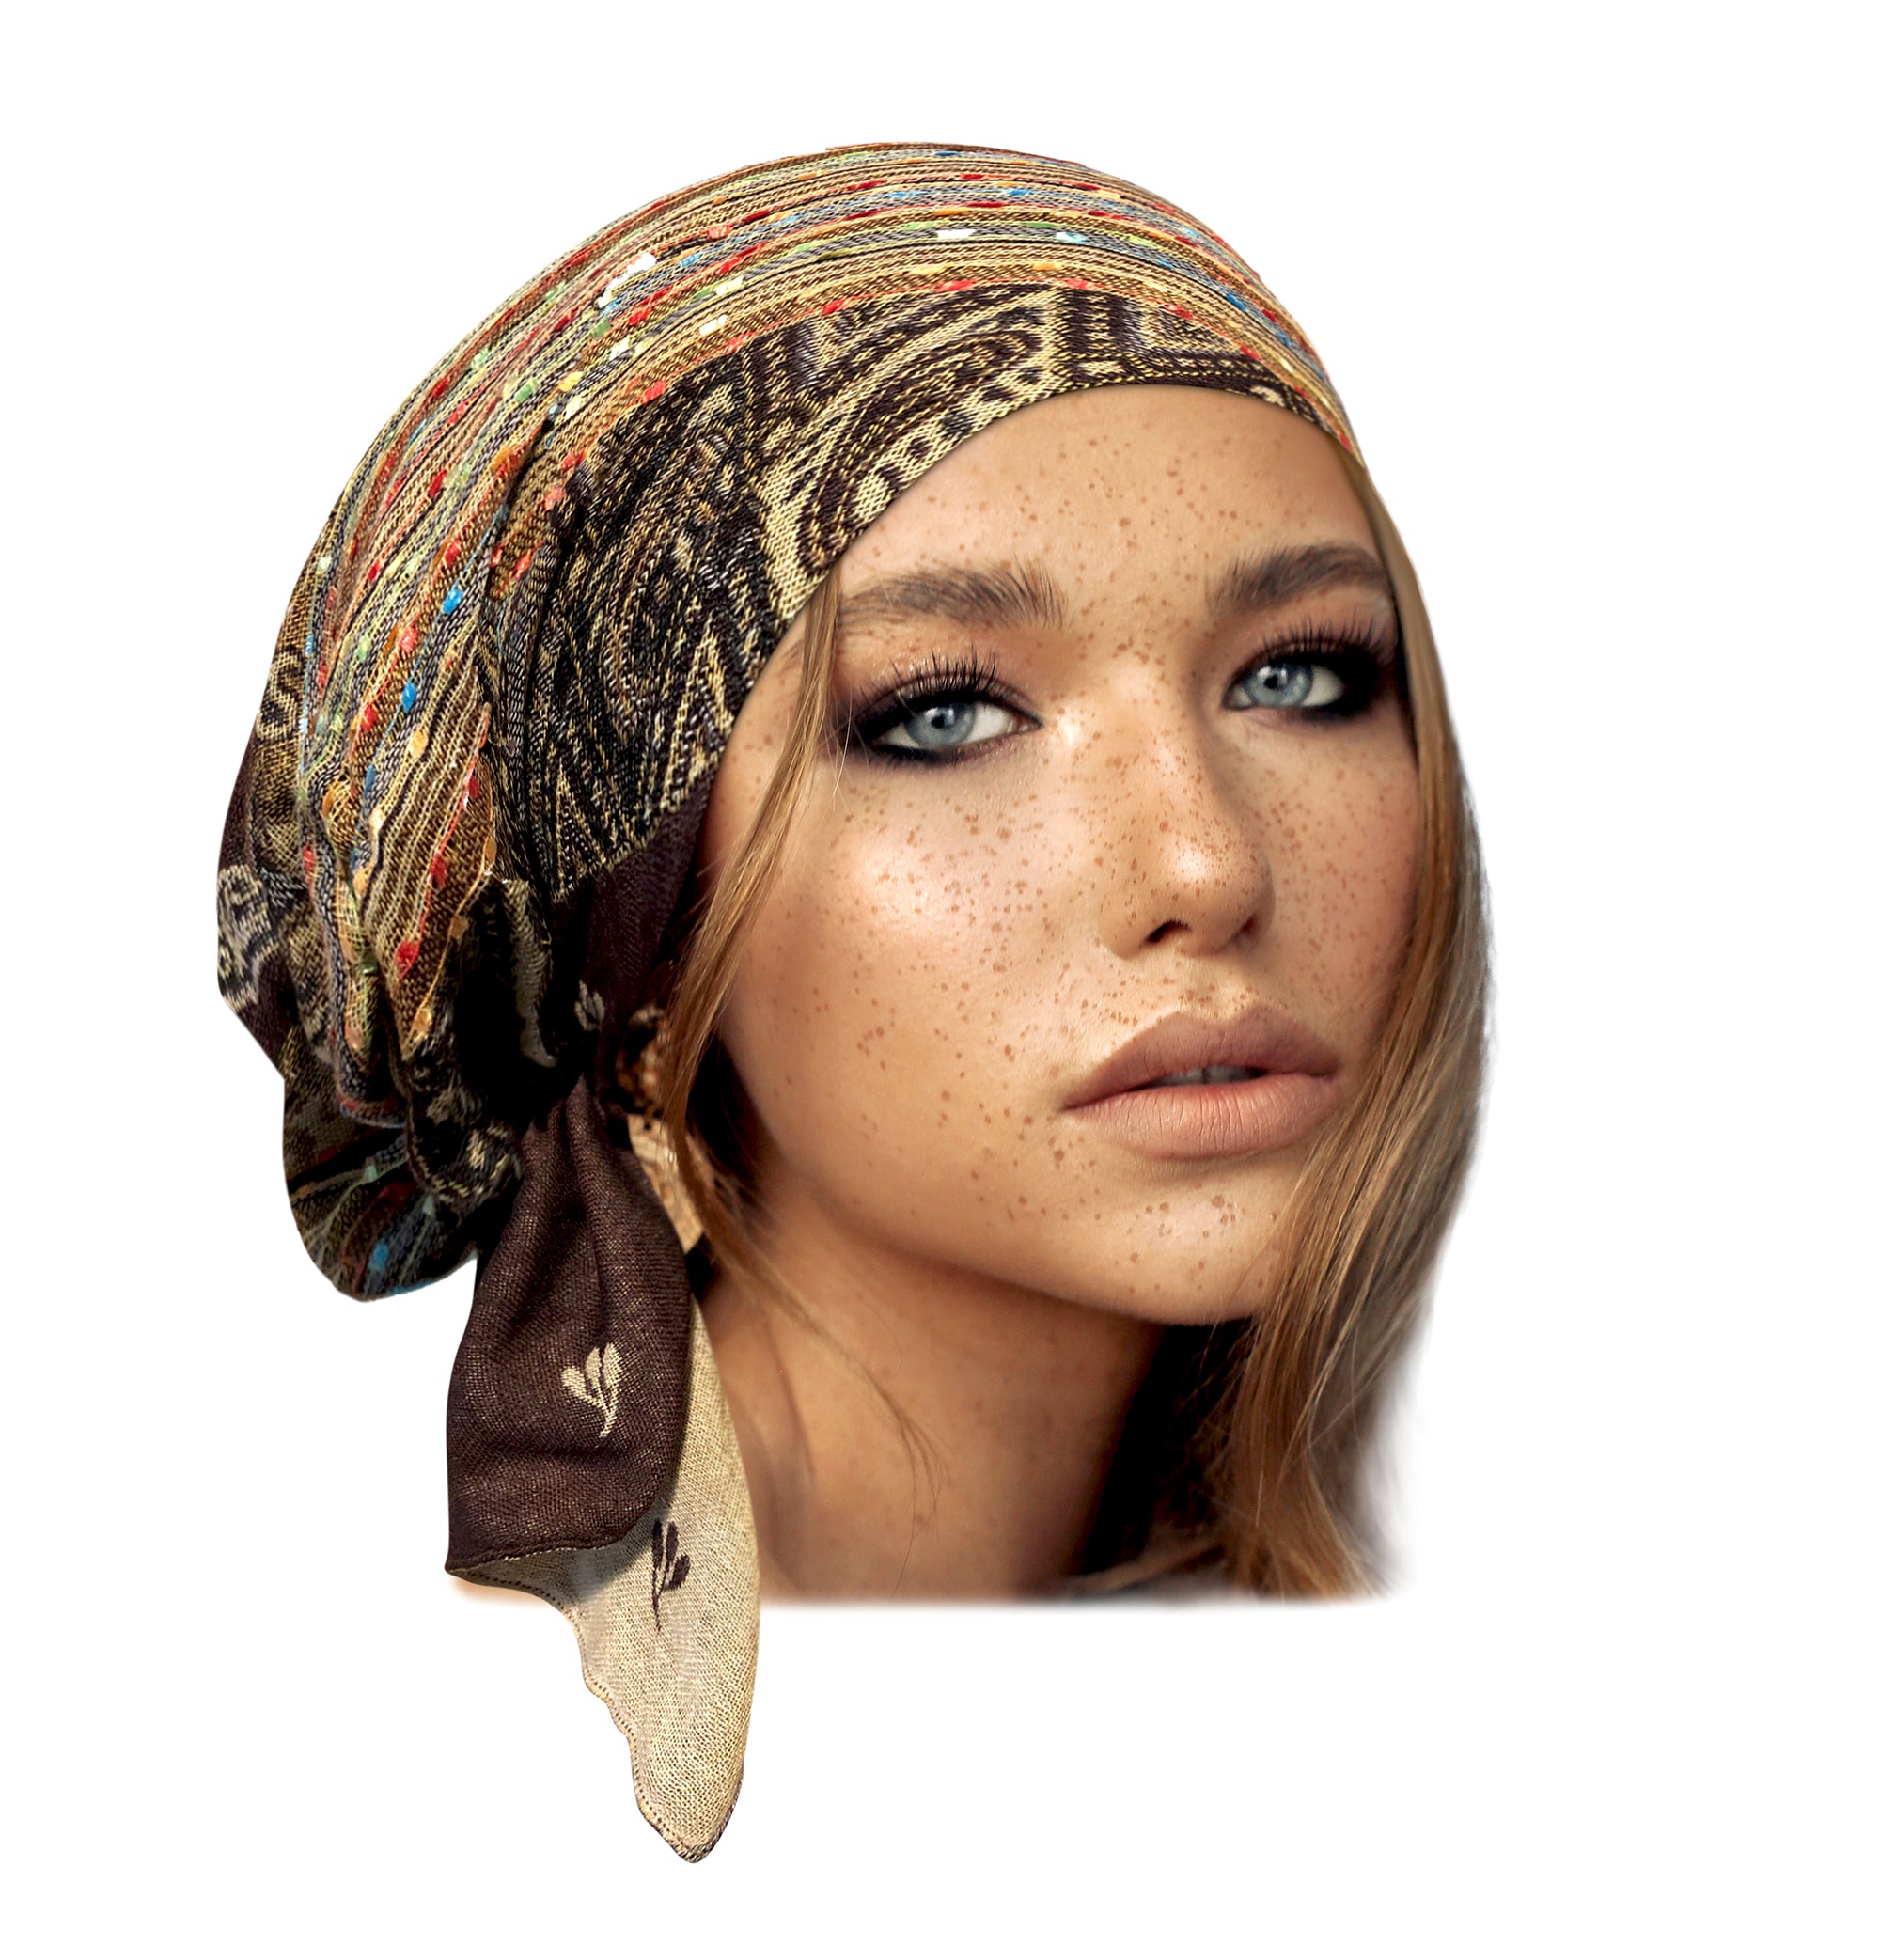 Just Passing Through Head Scarf - Brown/combo